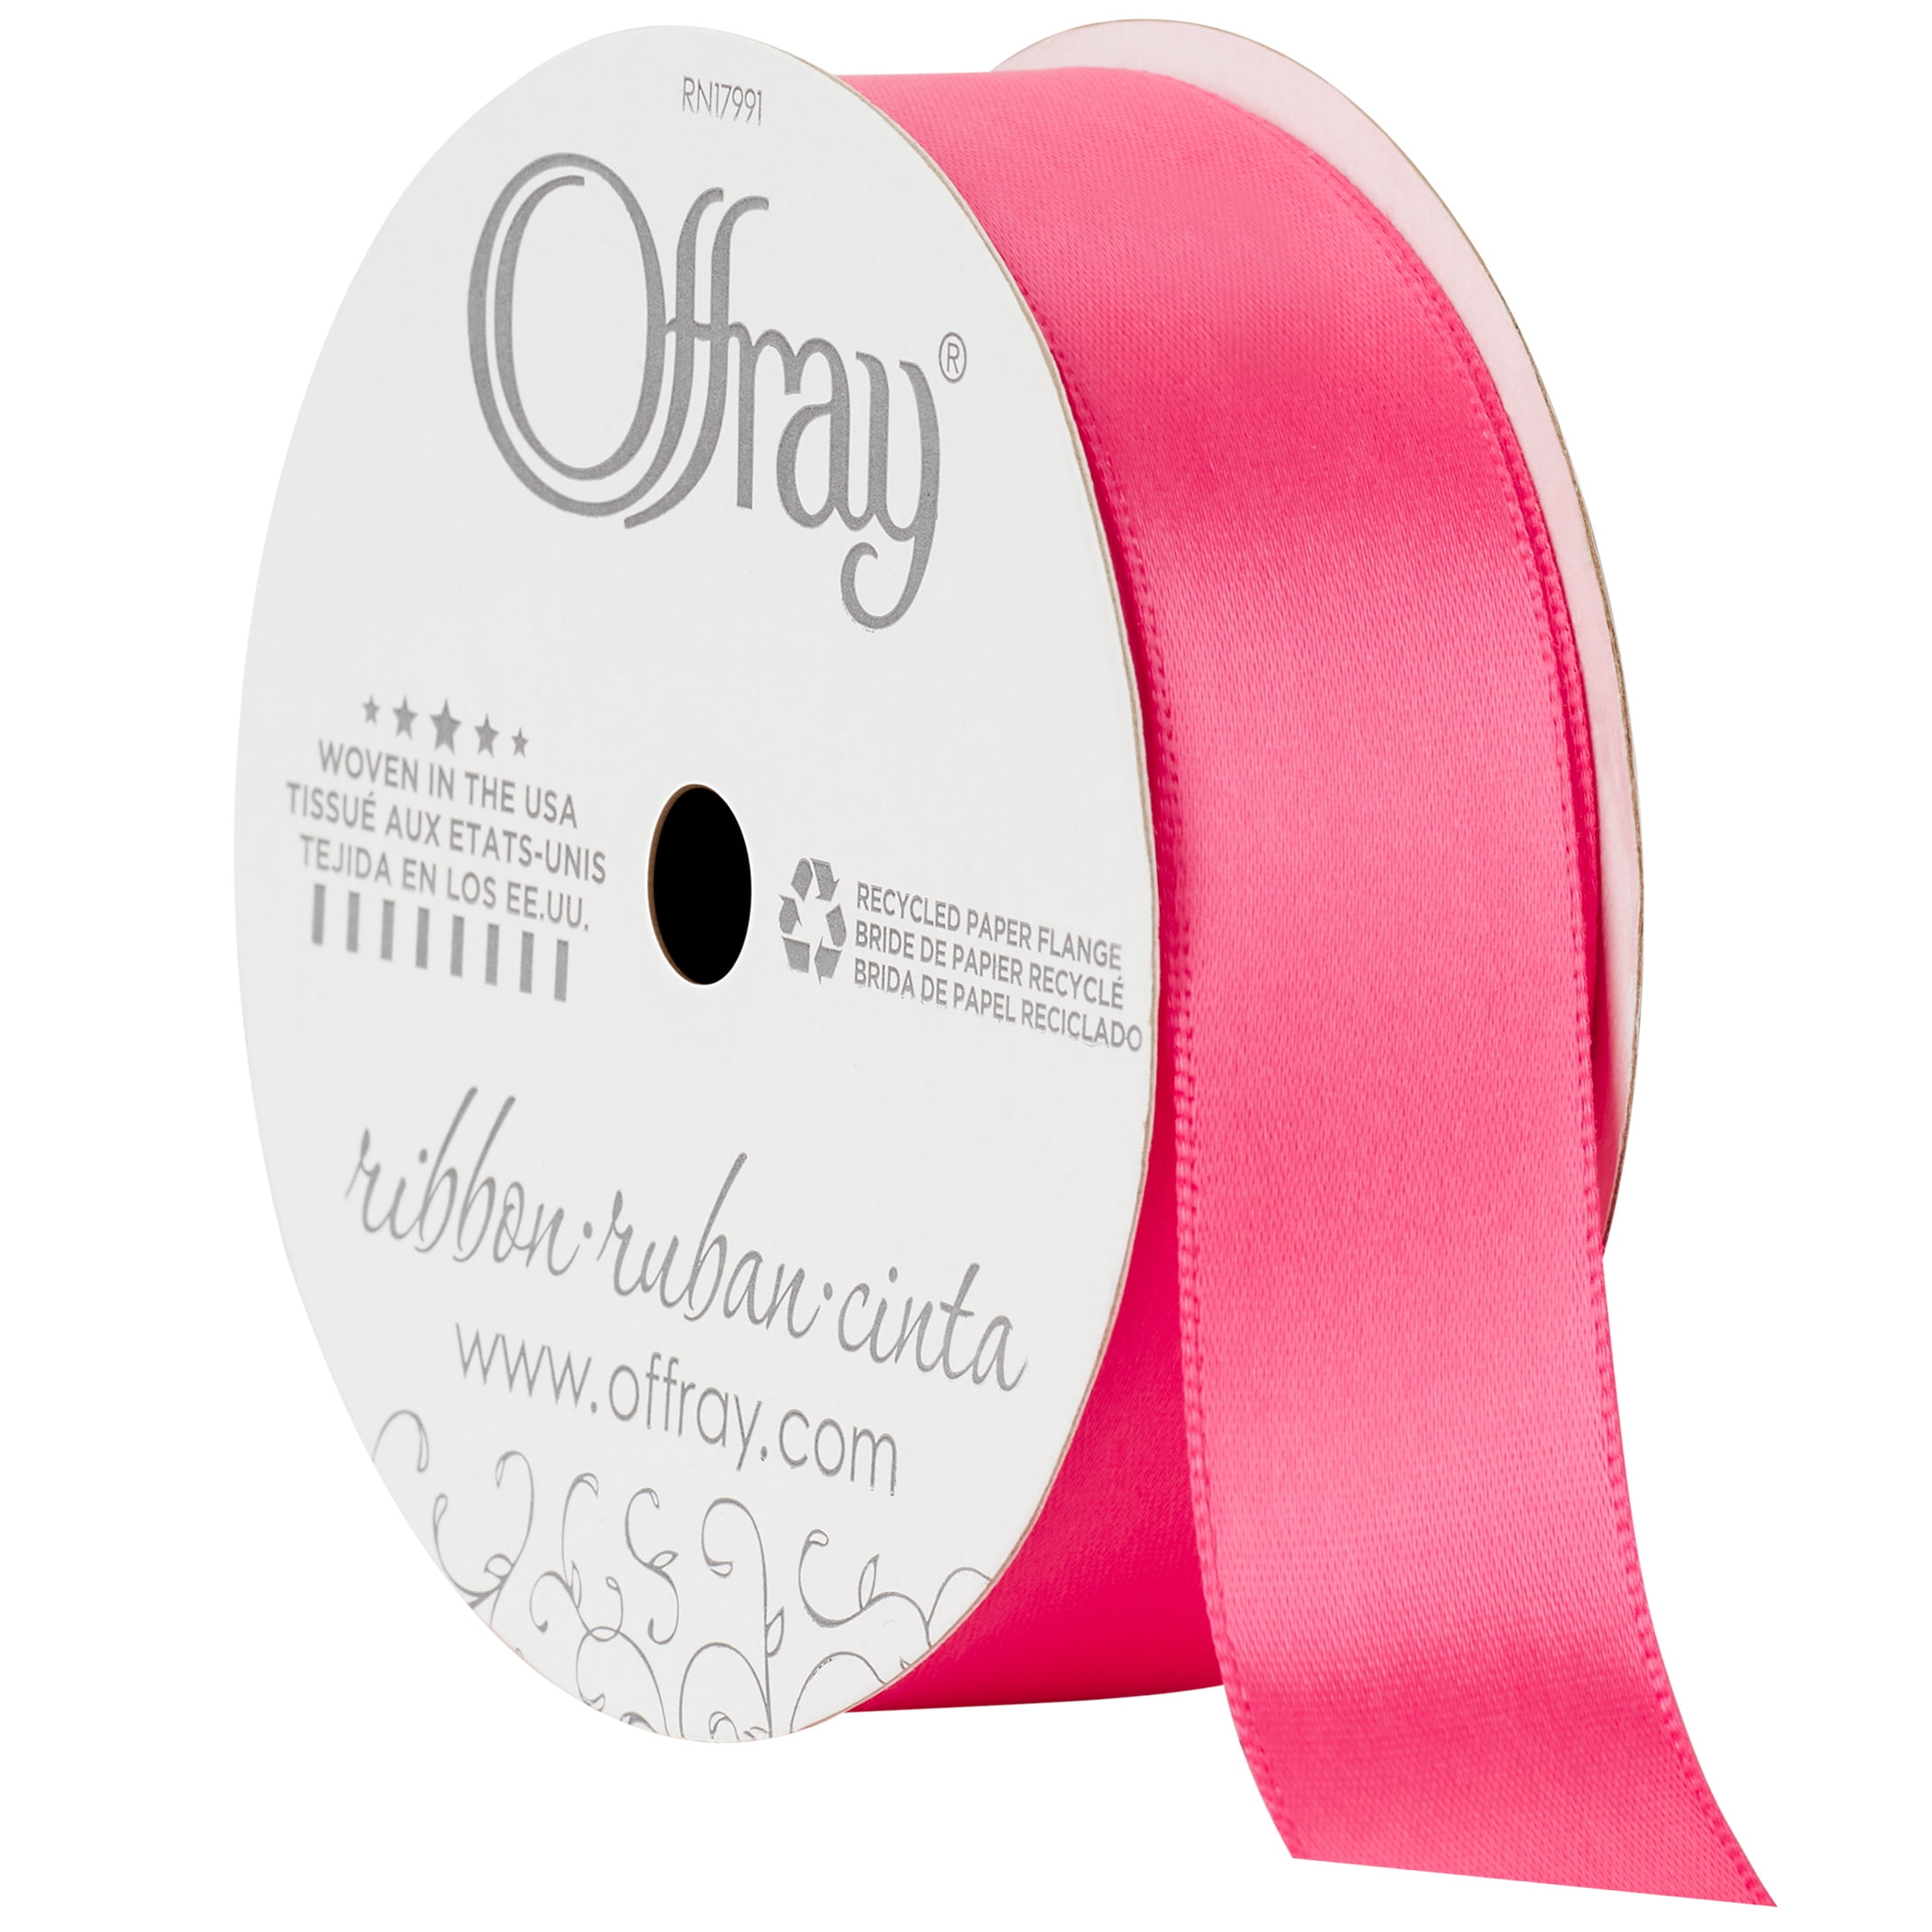 7/8” Dogs in the Bathtub on Shocking Pink Grosgrain Ribbon